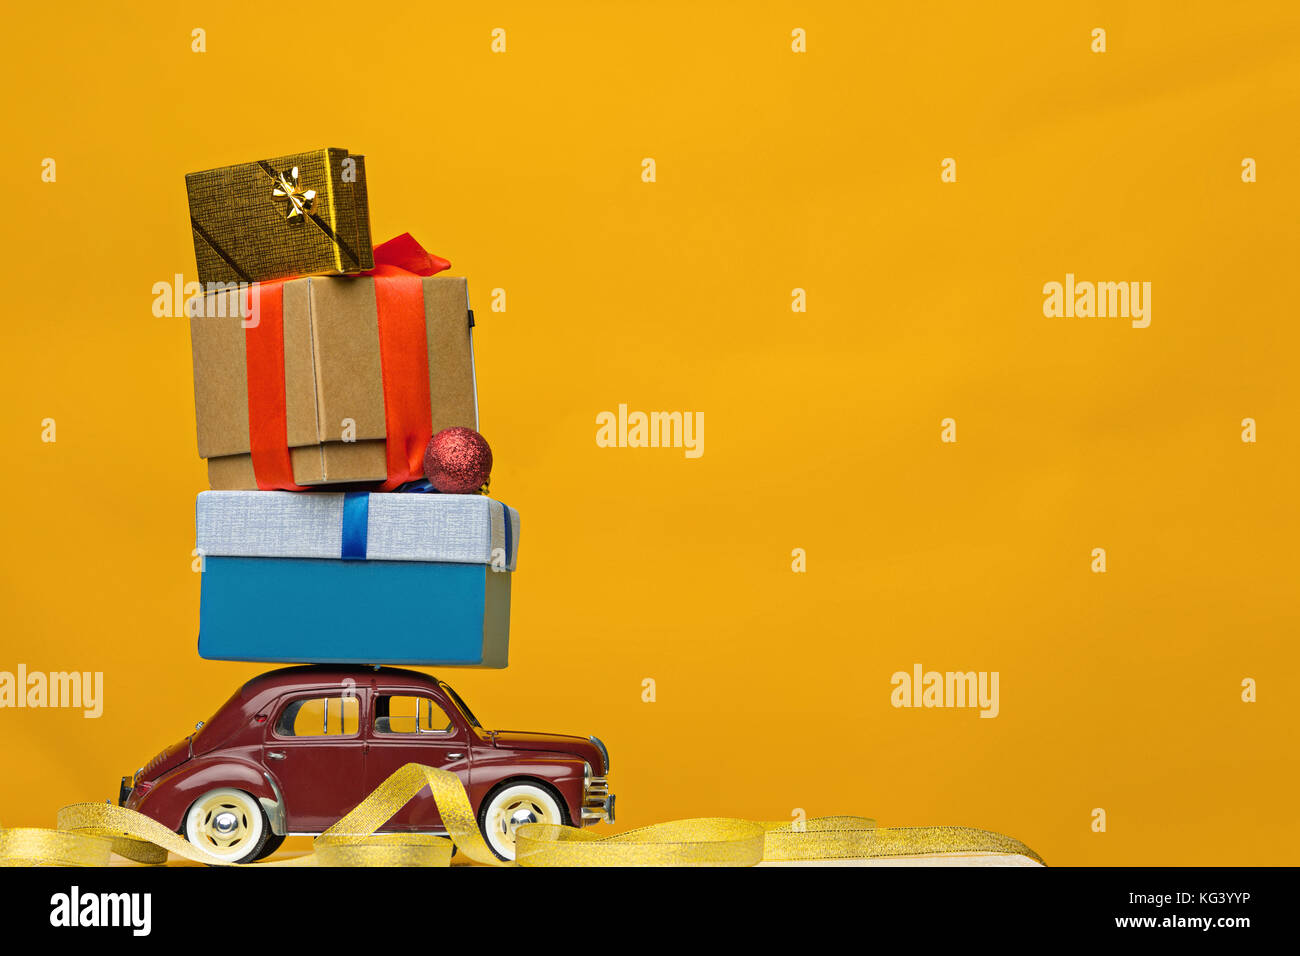 Blue retro toy car delivering Christmas or New Year gifts, on yellow Stock Photo